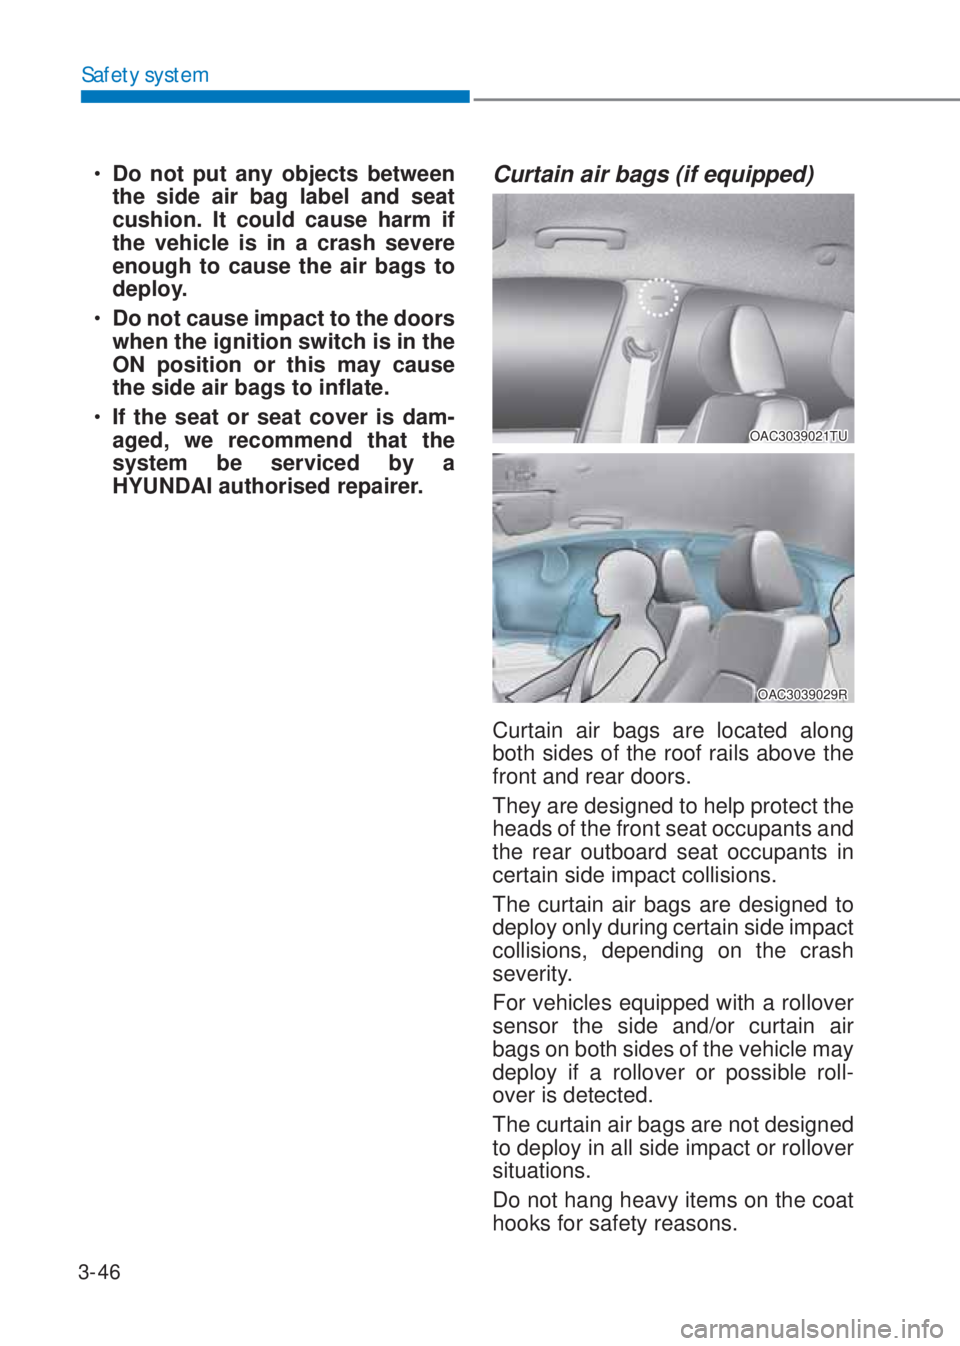 HYUNDAI I10 2022  Owners Manual 3-46
Safety system
�‡�Do not put any objects between 
the side air bag label and seat 
cushion. It could cause harm if 
the vehicle is in a crash severe 
enough to cause the air bags to 
deploy.
��